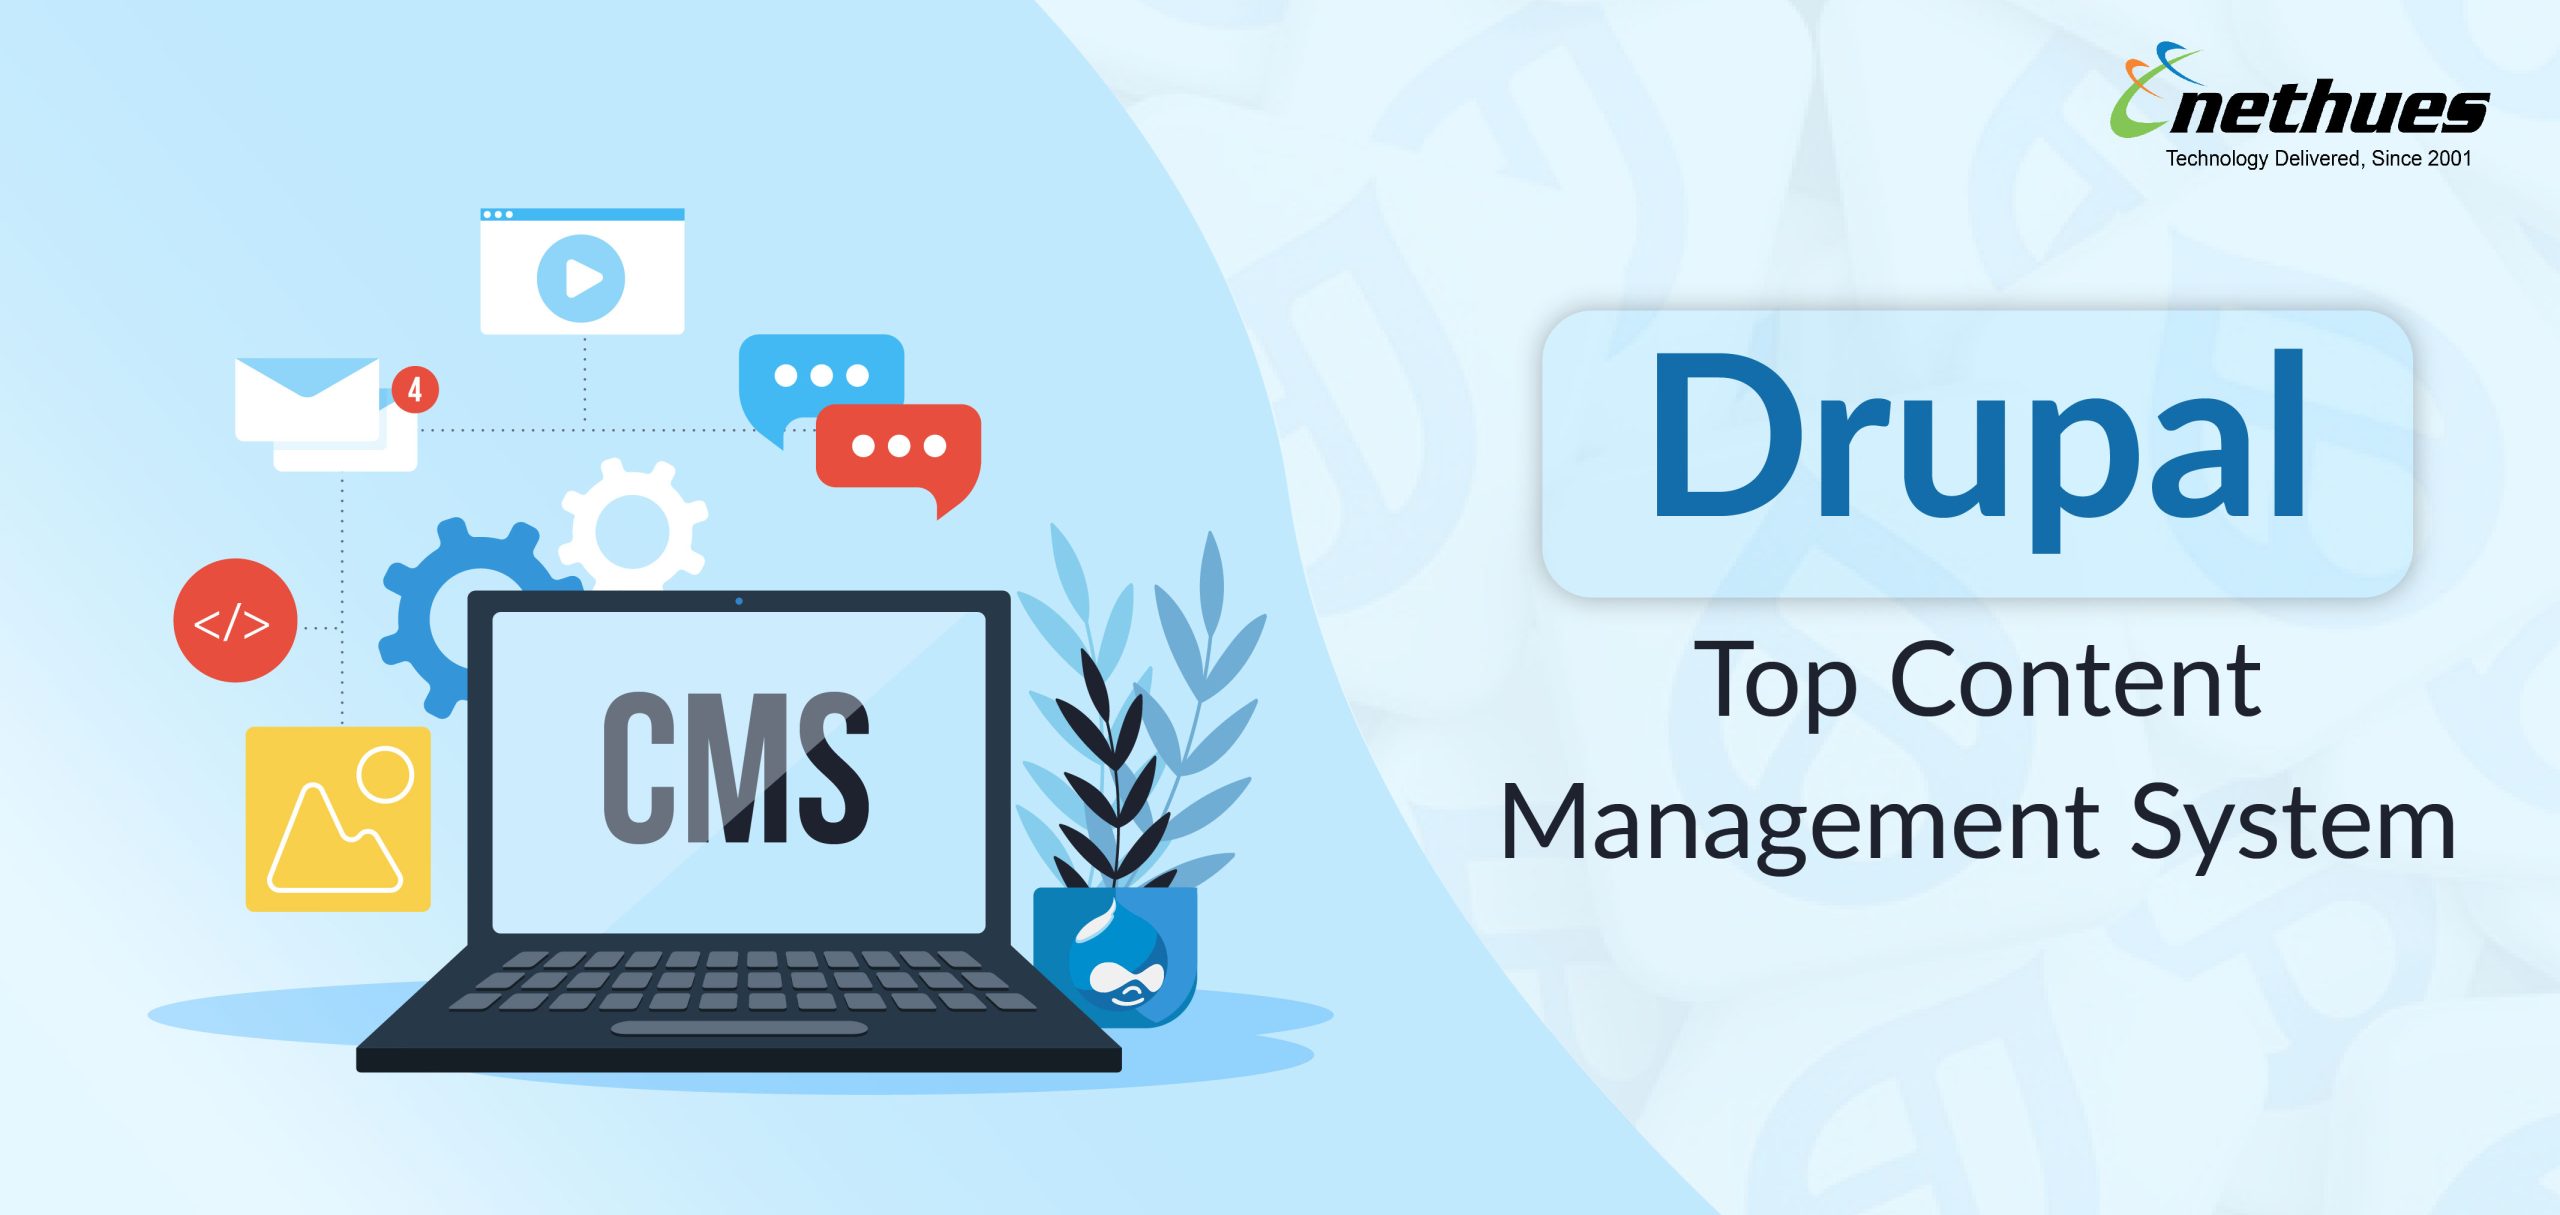 Why Drupal is a top content management system?